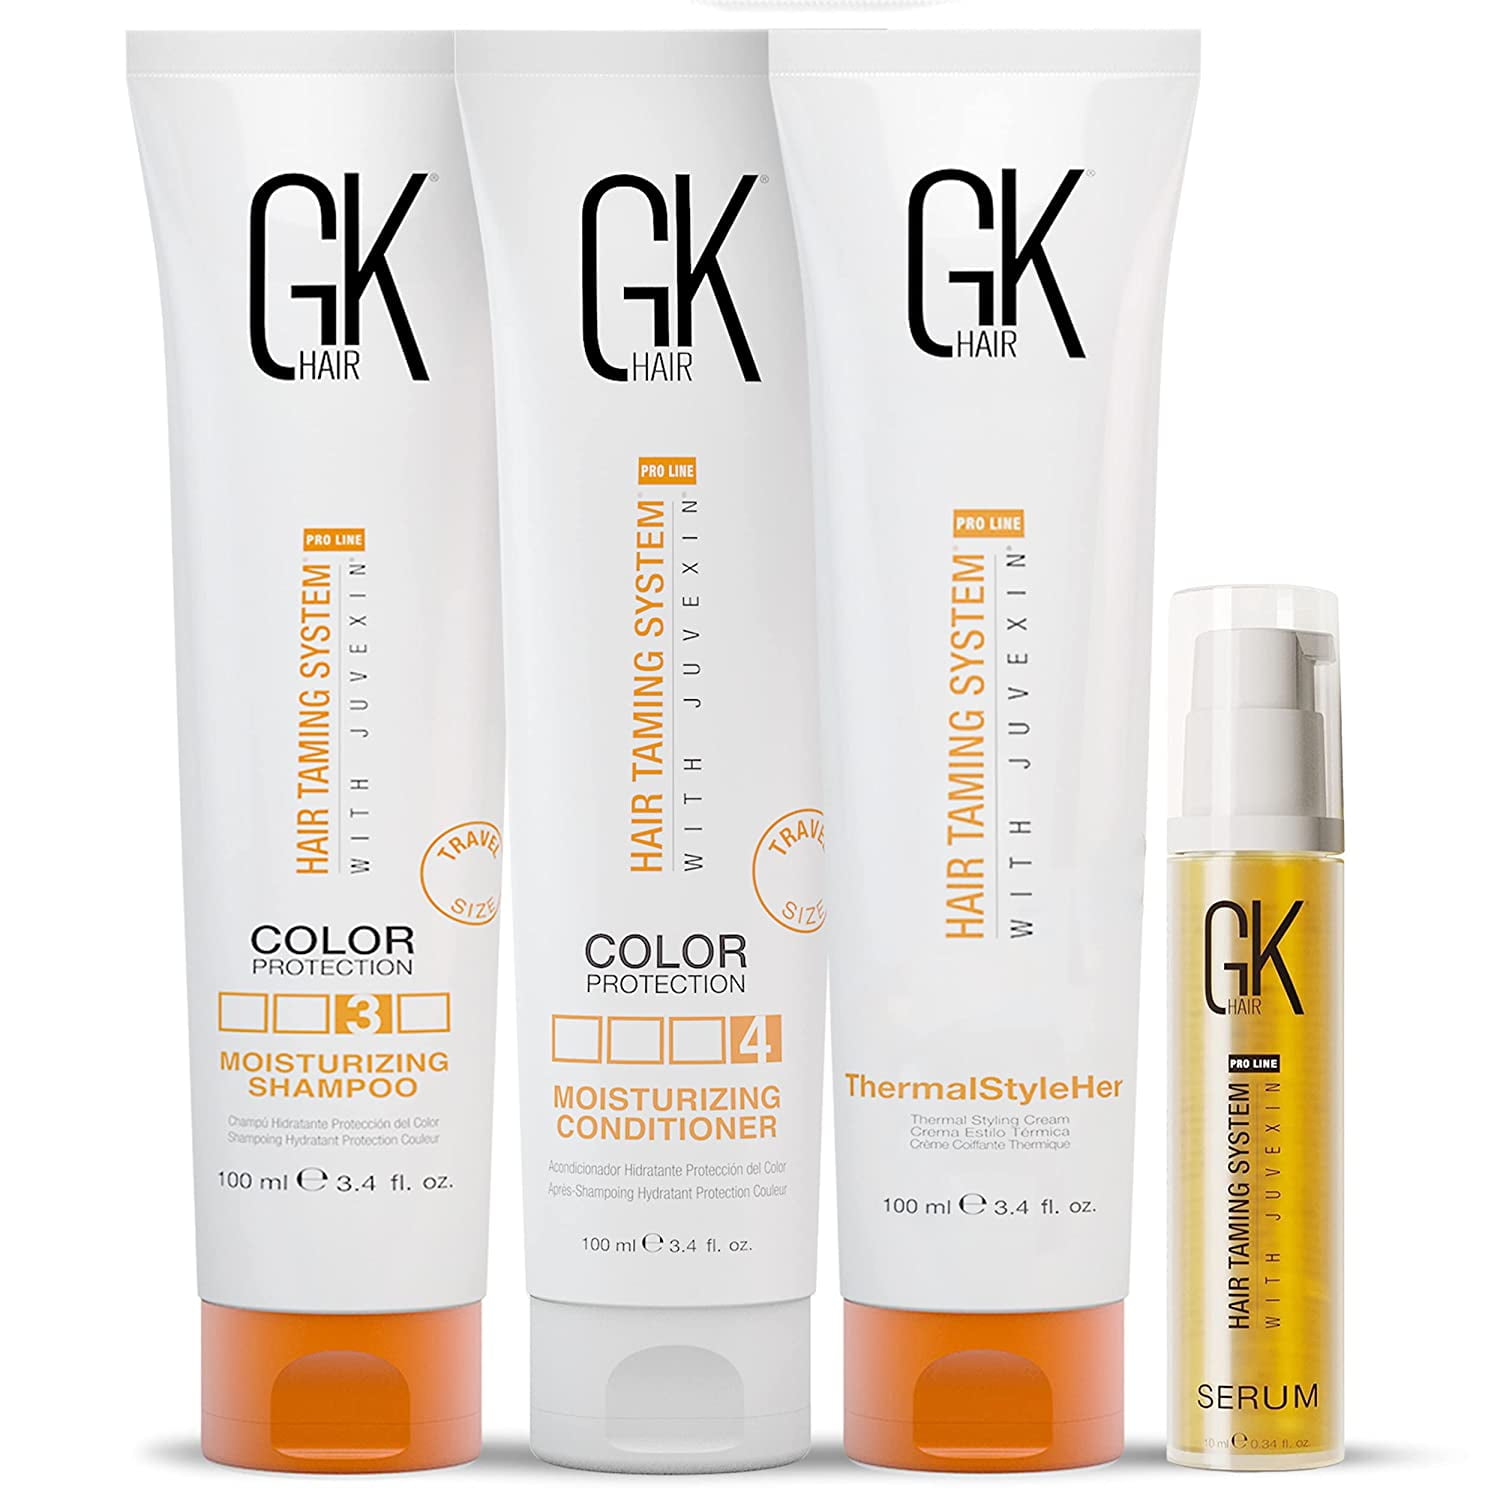 GKhair® Professional | Hair Care Products | Global Keratin - Juvexin